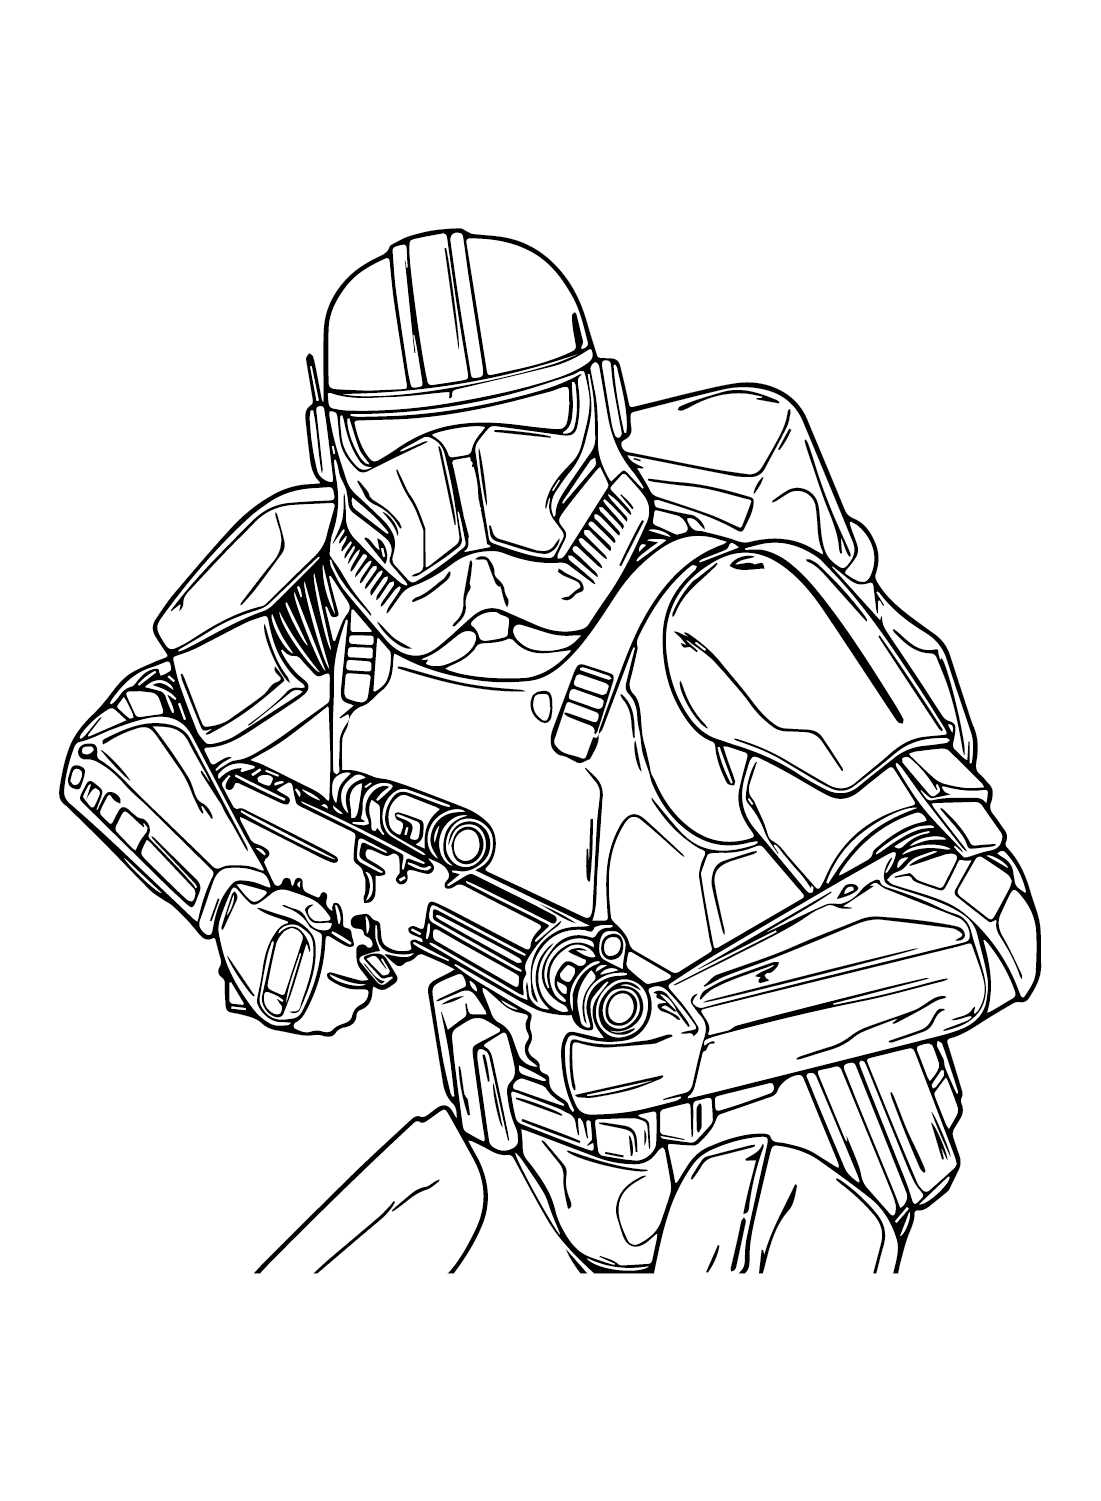 Shock Trooper color Sheets Coloring Page